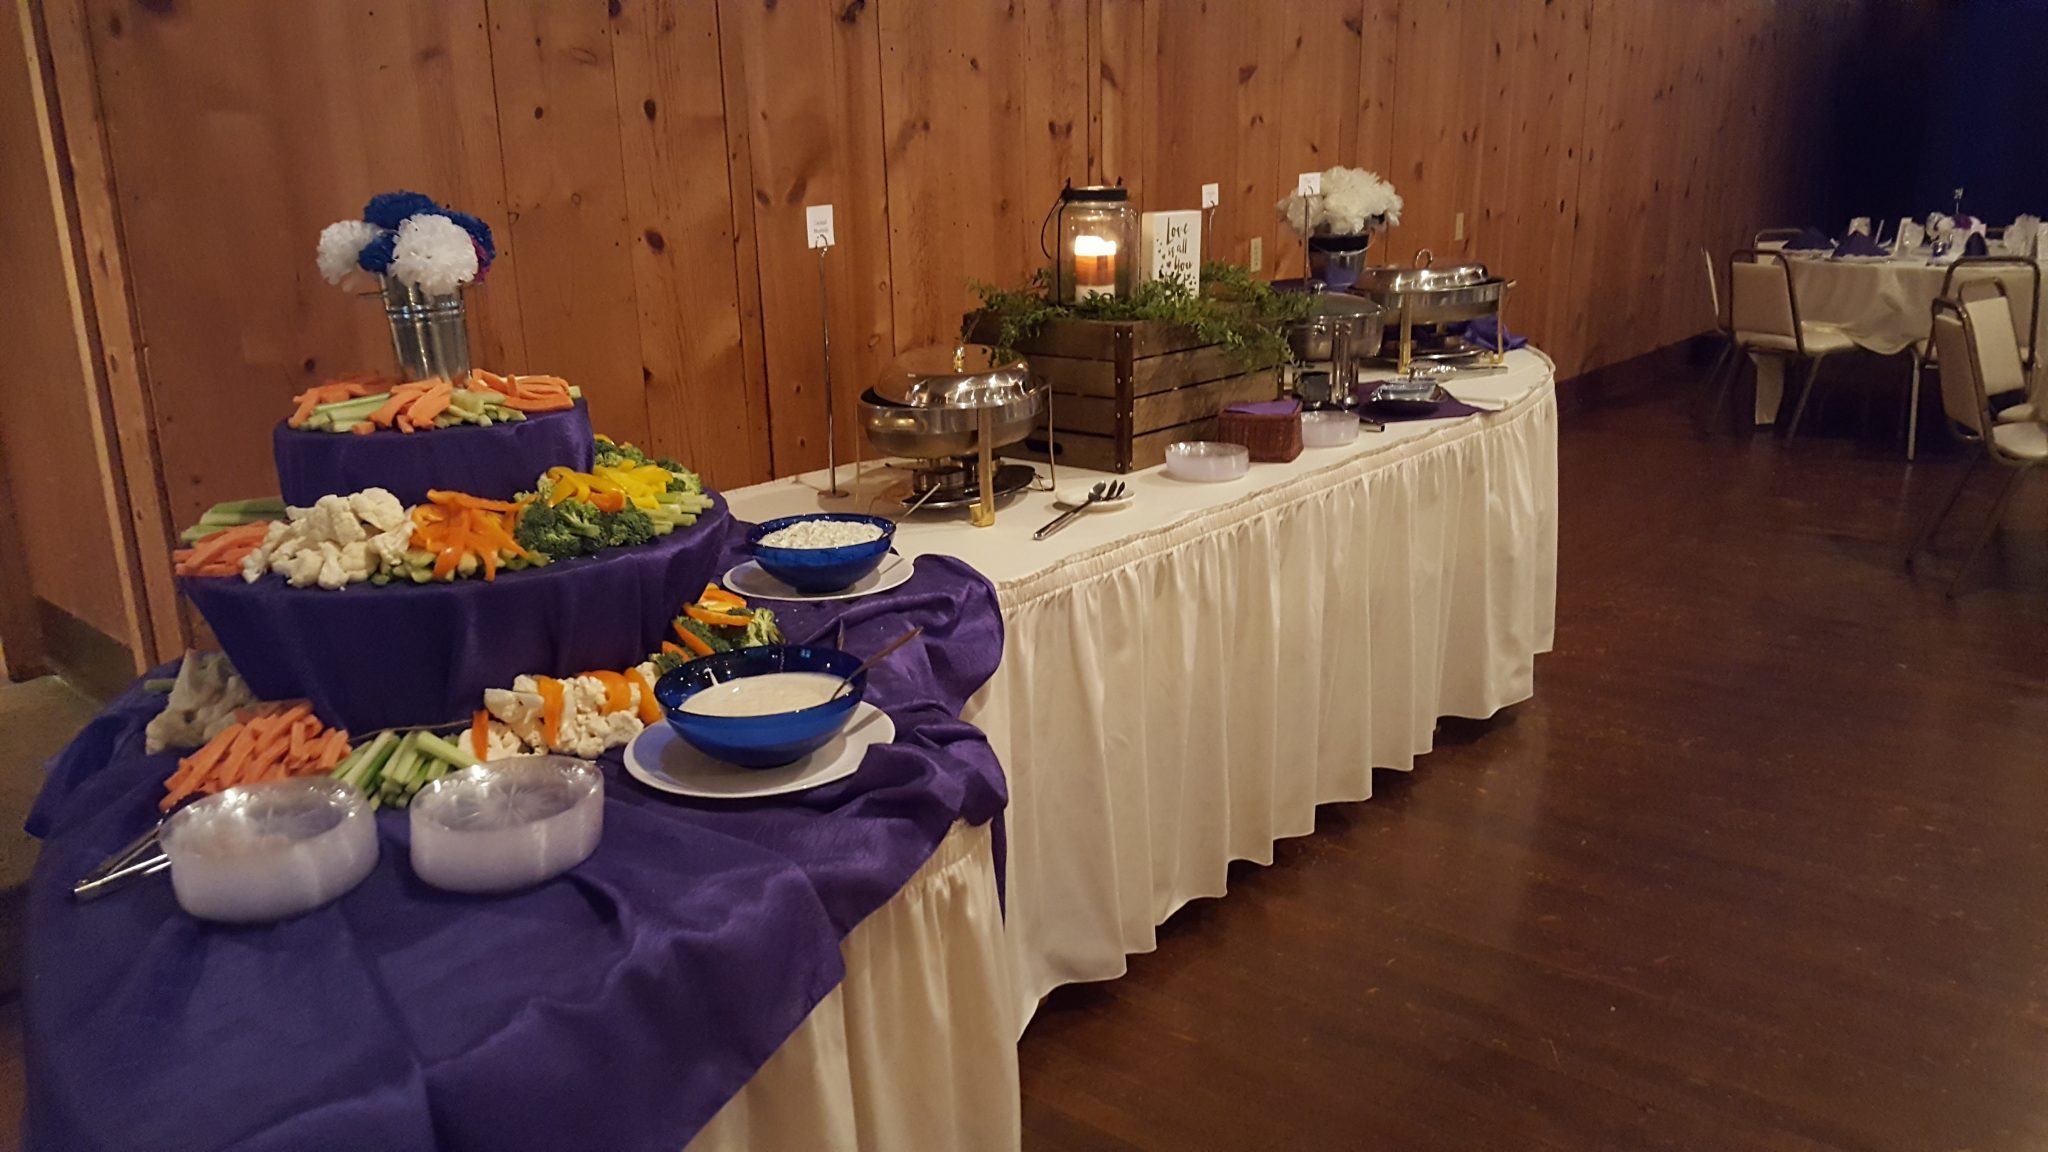 A large rectangle table with food containers